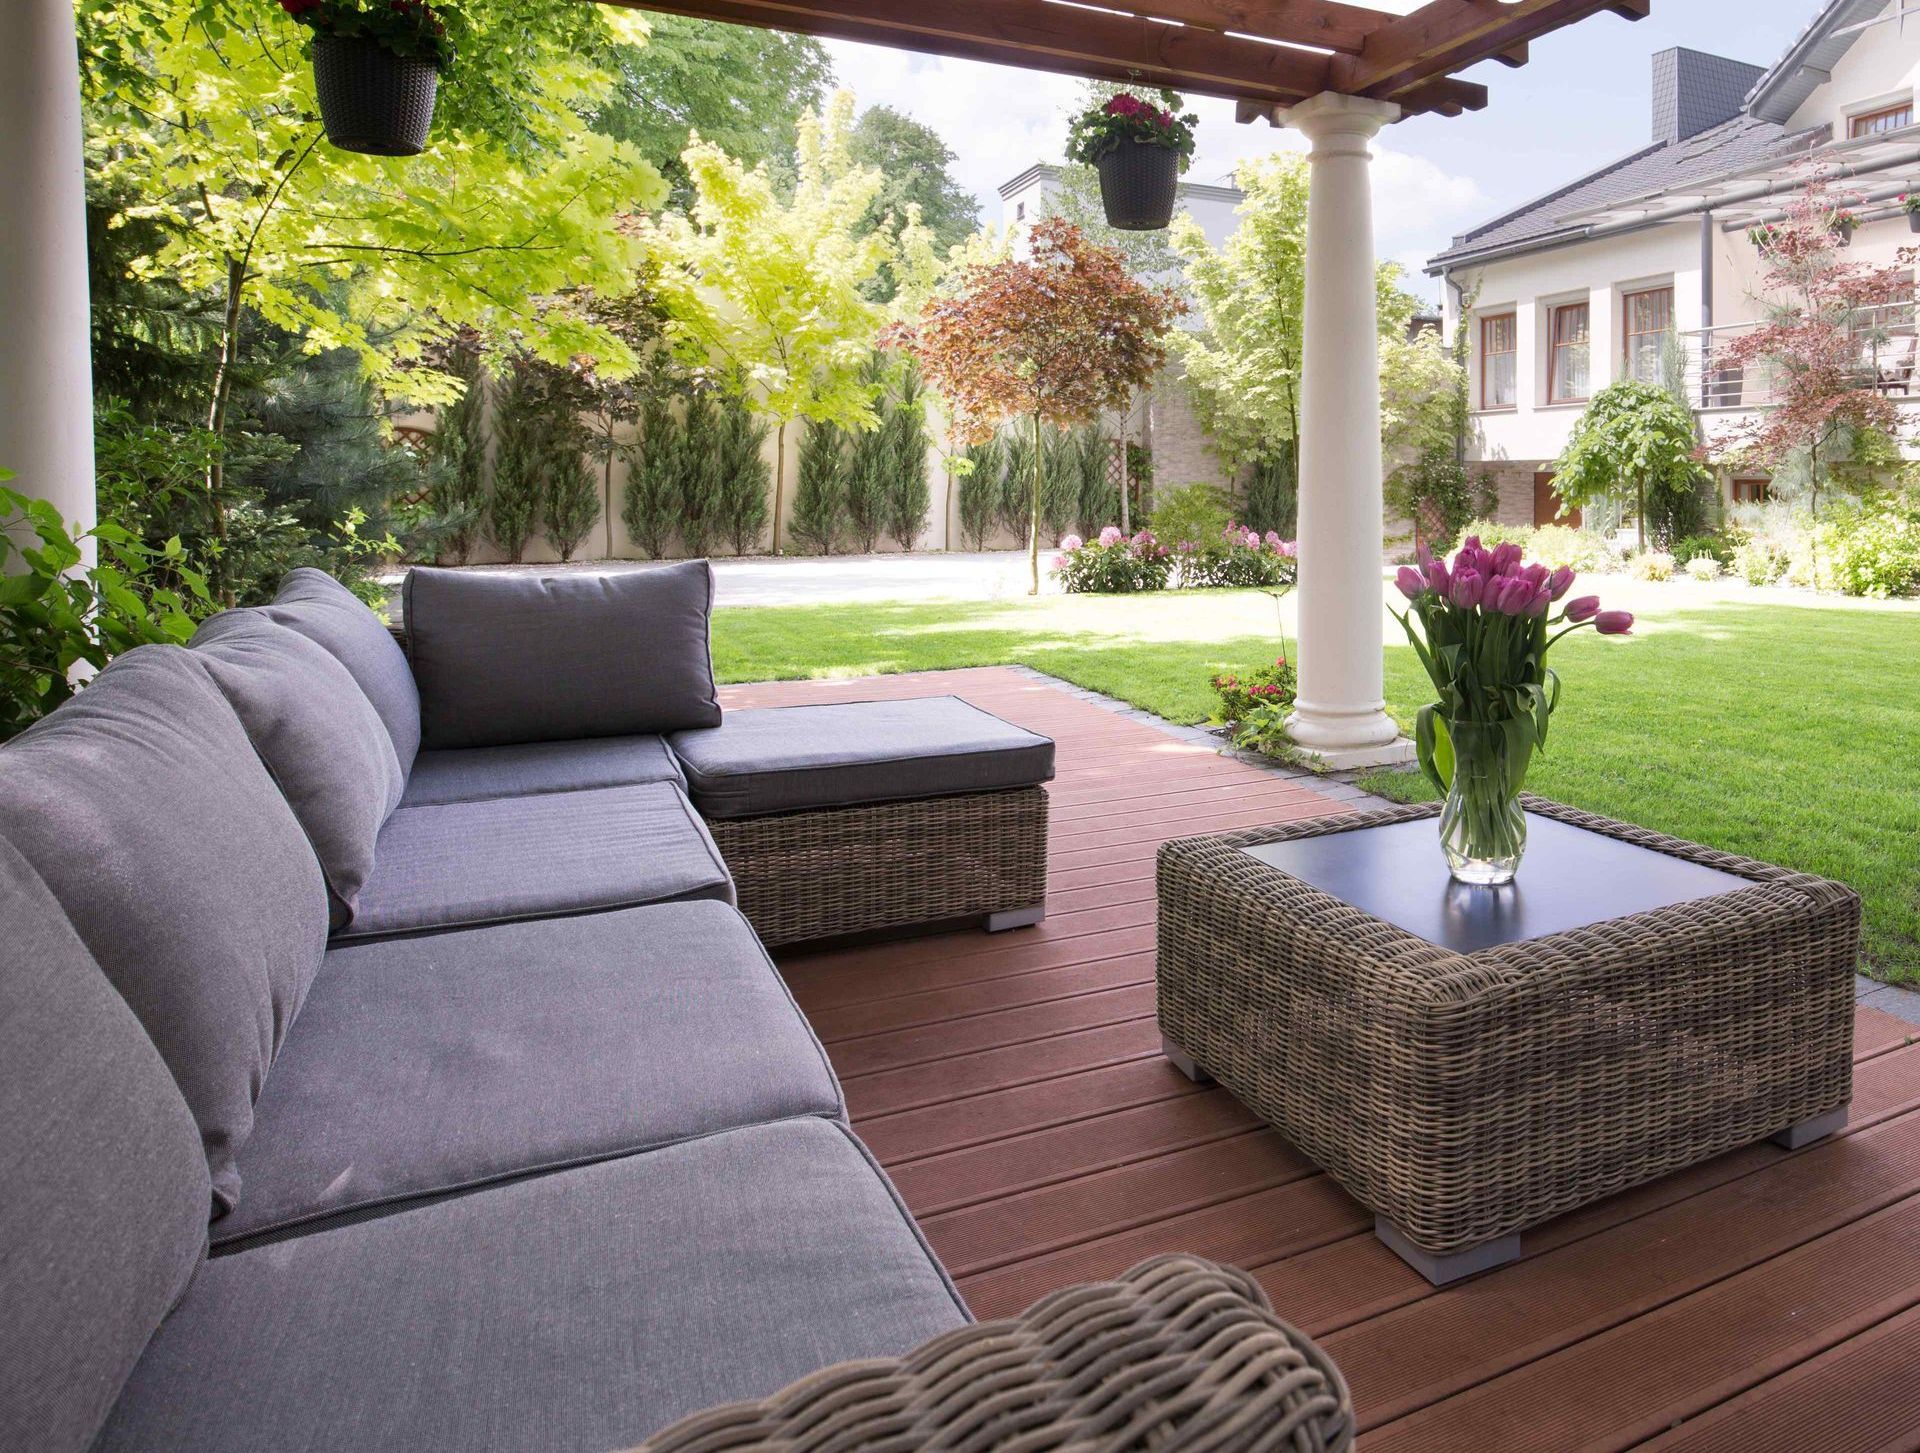 Luxury Outdoor Living Space With Furniture